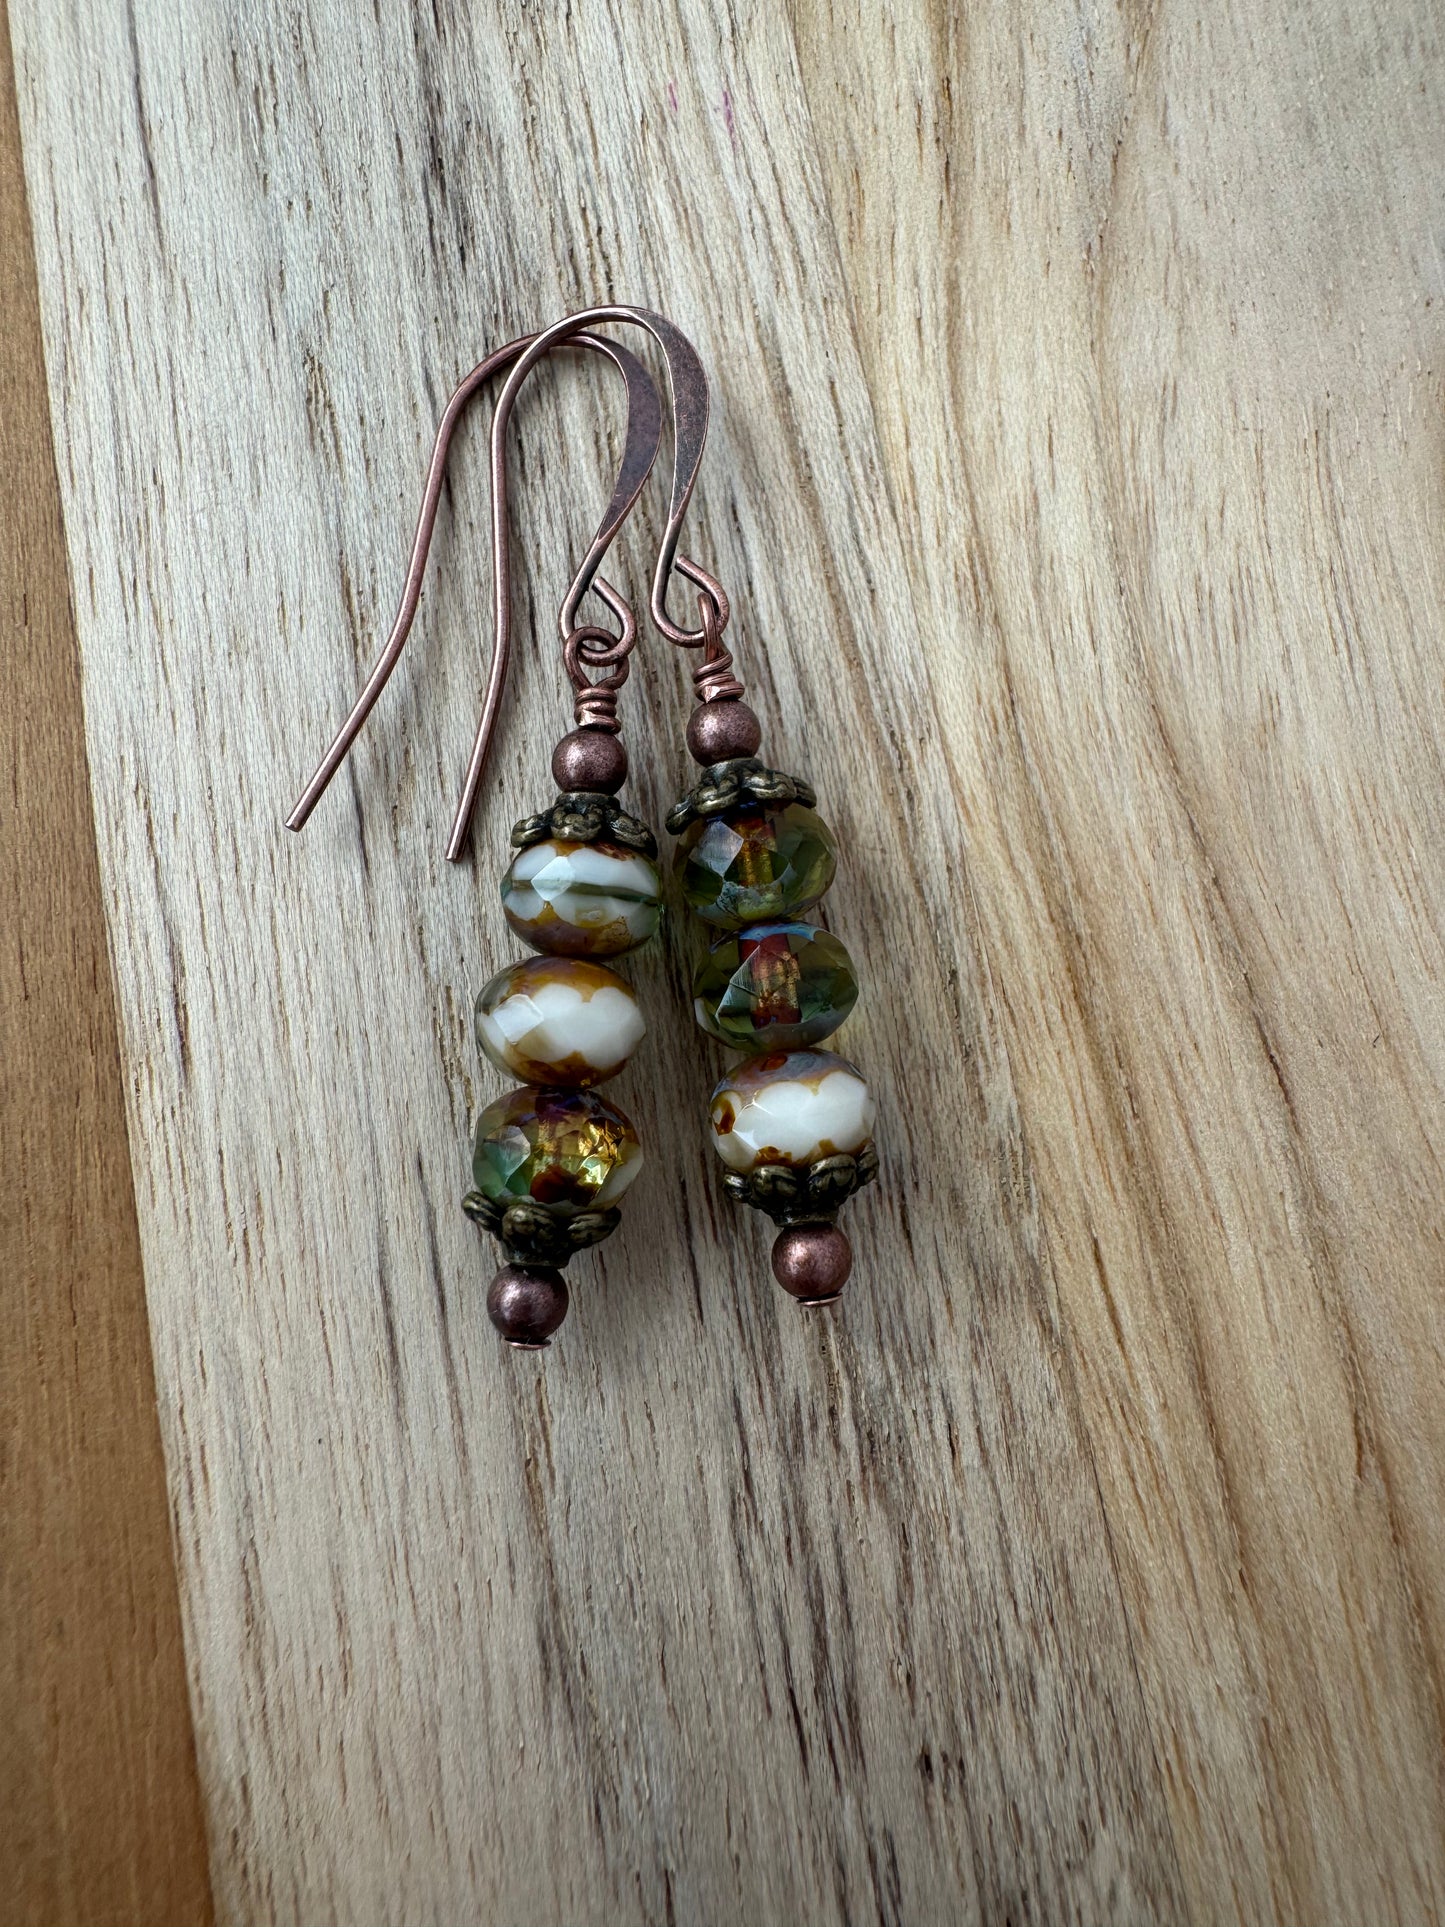 Stacked Czech Glass Vintage Boho Dangle Earrings with Antique Bronze and Copper Accent Beads - My Urban Gems